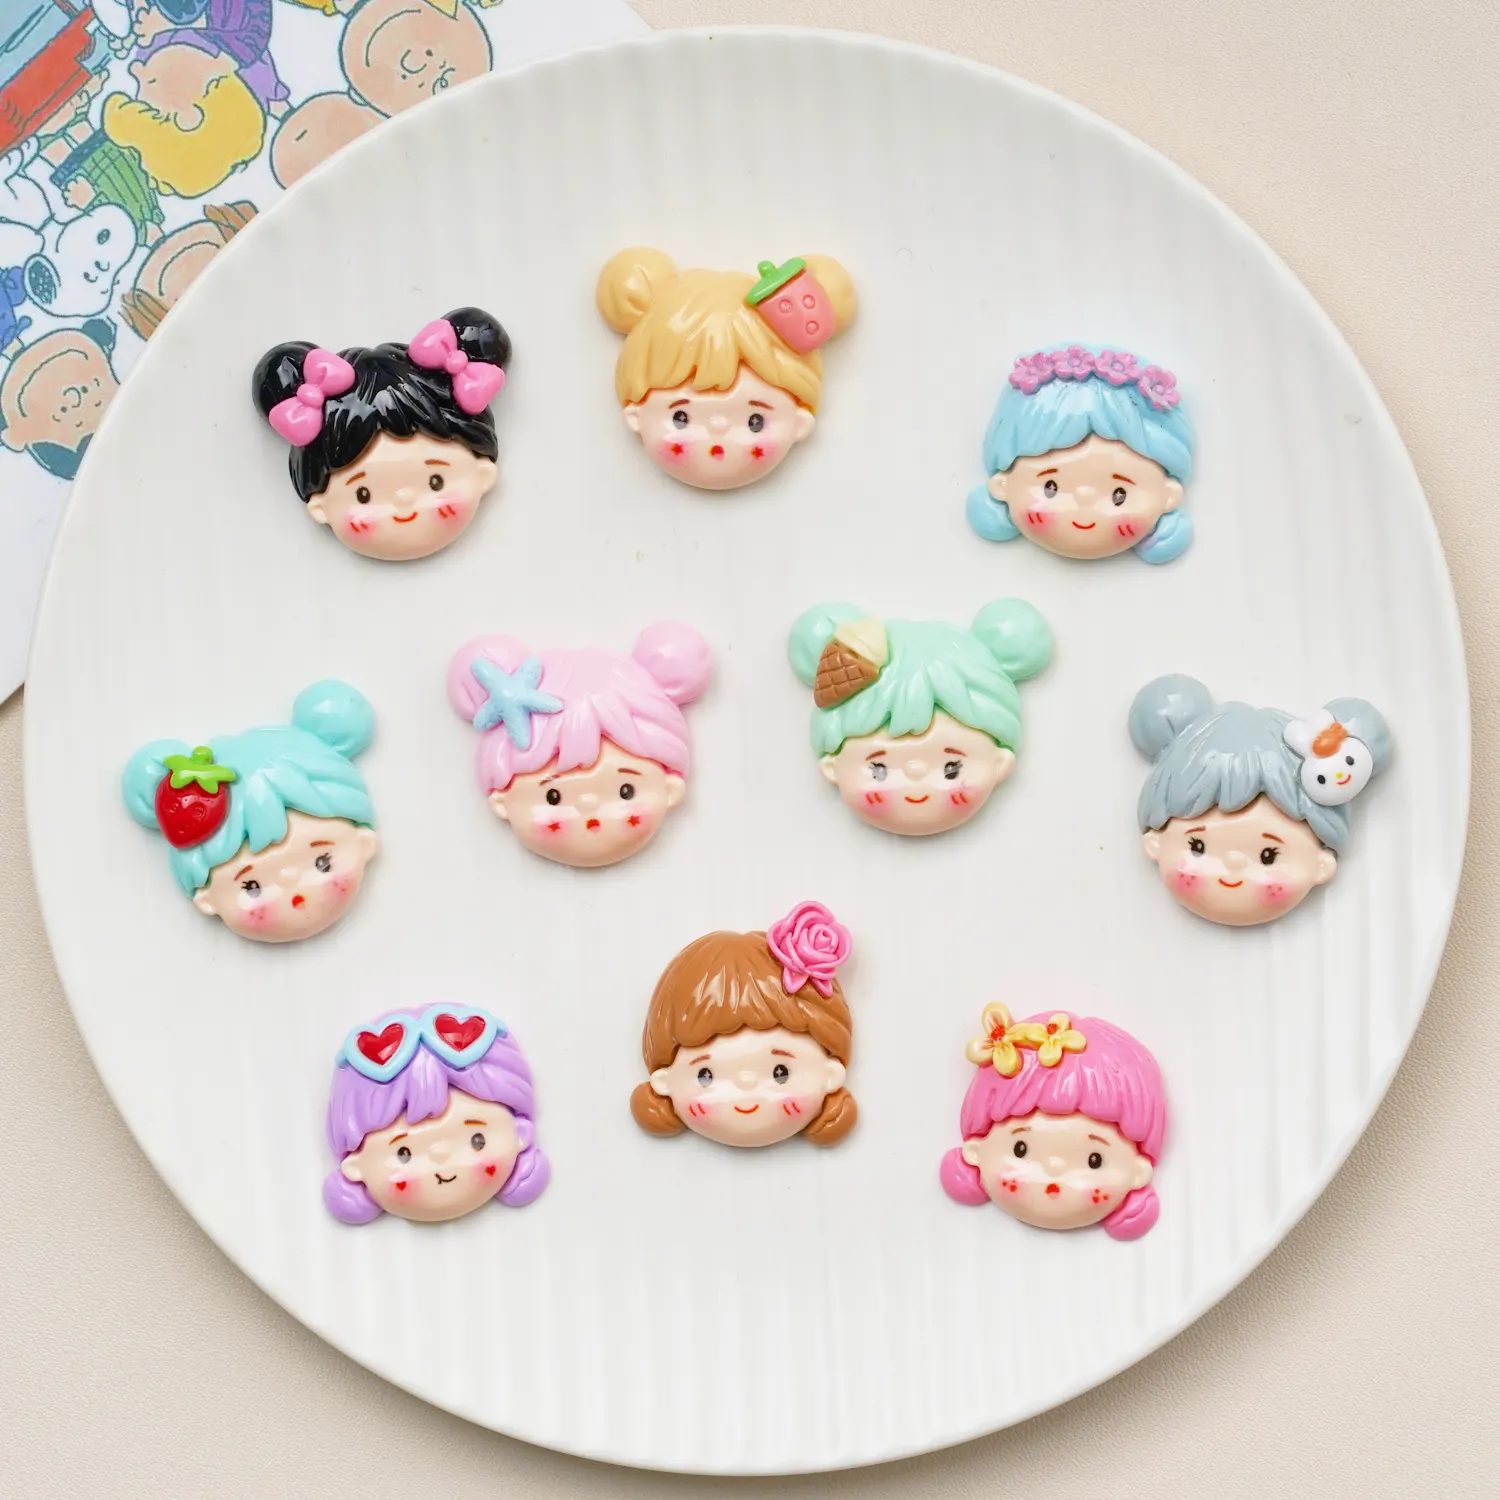 Hot selling lovely cartoon girl heads charm cabochon resin accessories for phone case DIY hairpin jewelry pendant decoration